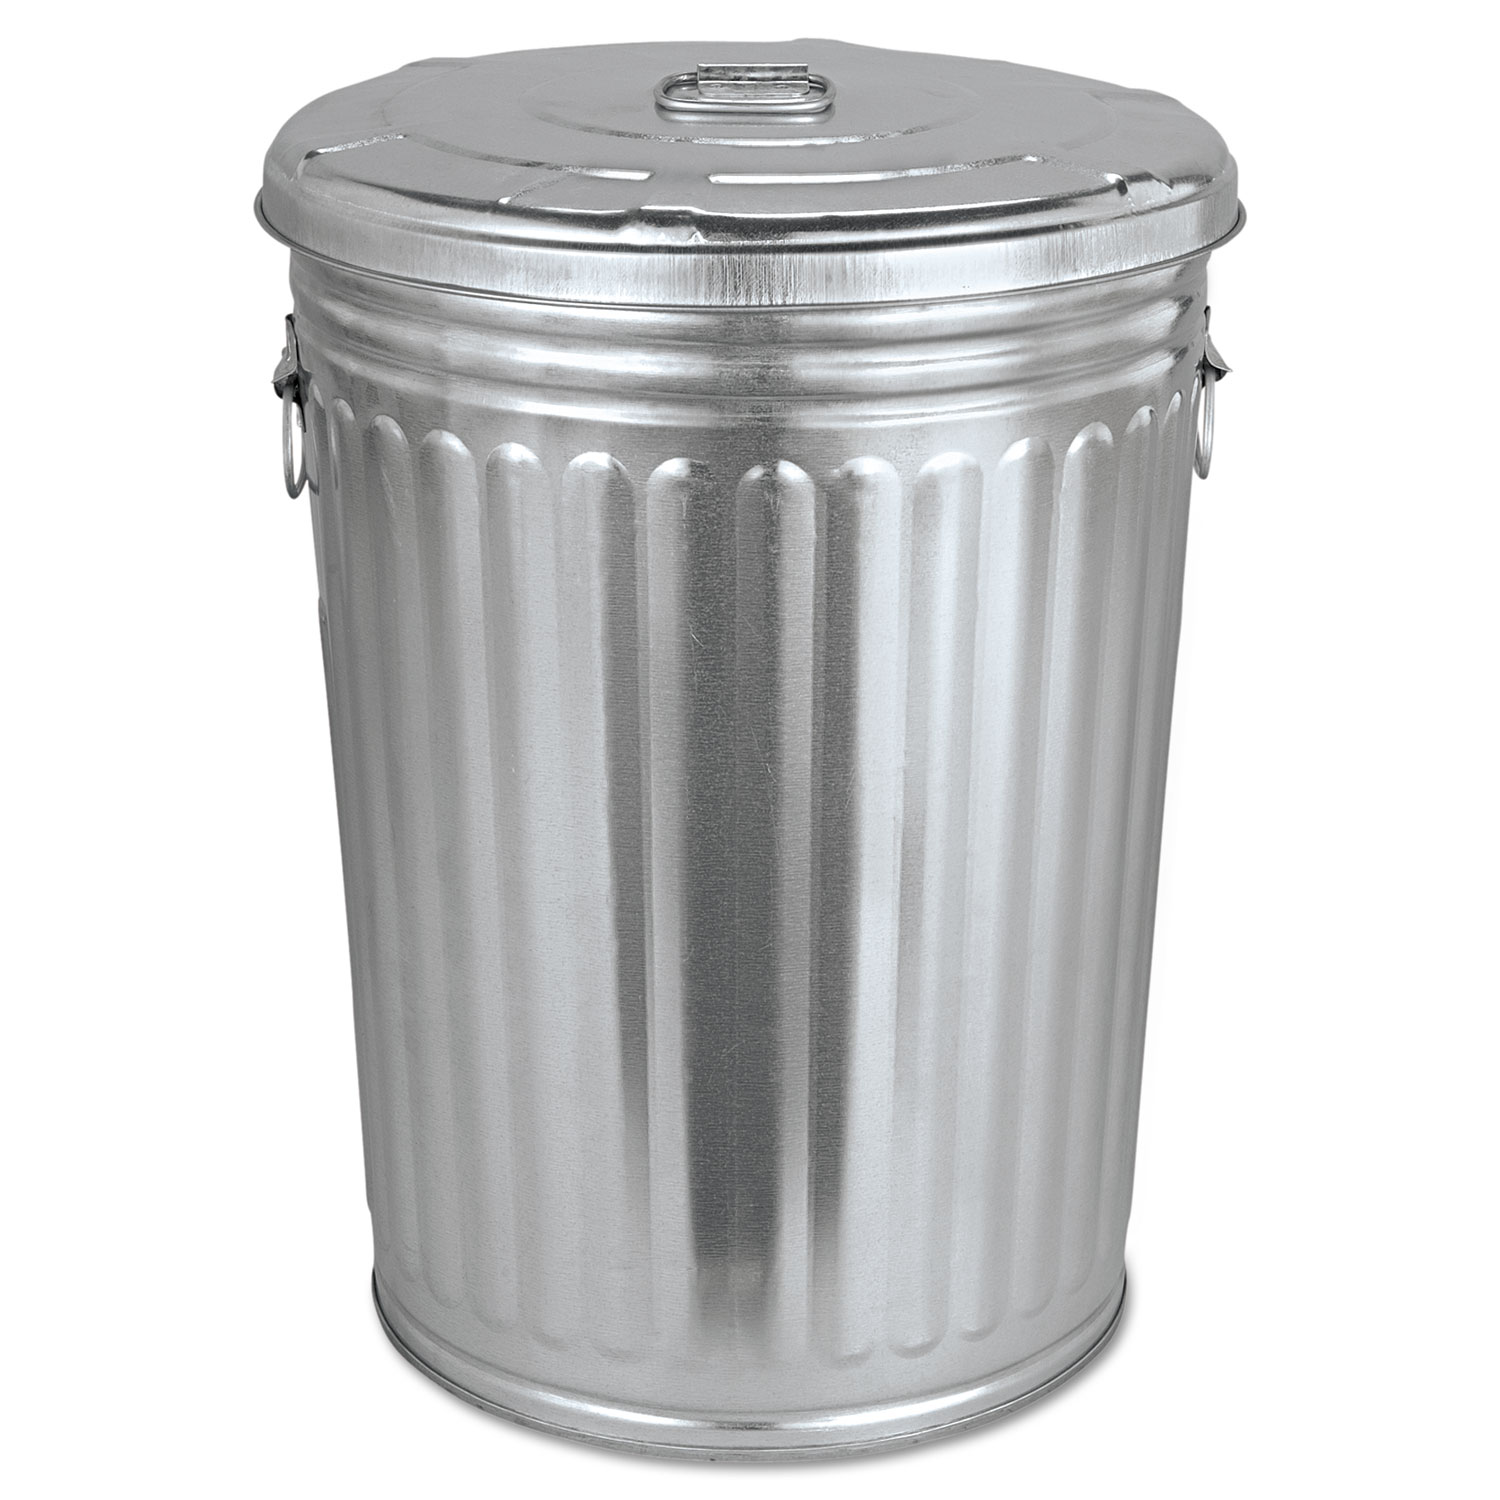 Pre-Galvanized Trash Can with Lid, Round, Steel, 20 gal, Gray